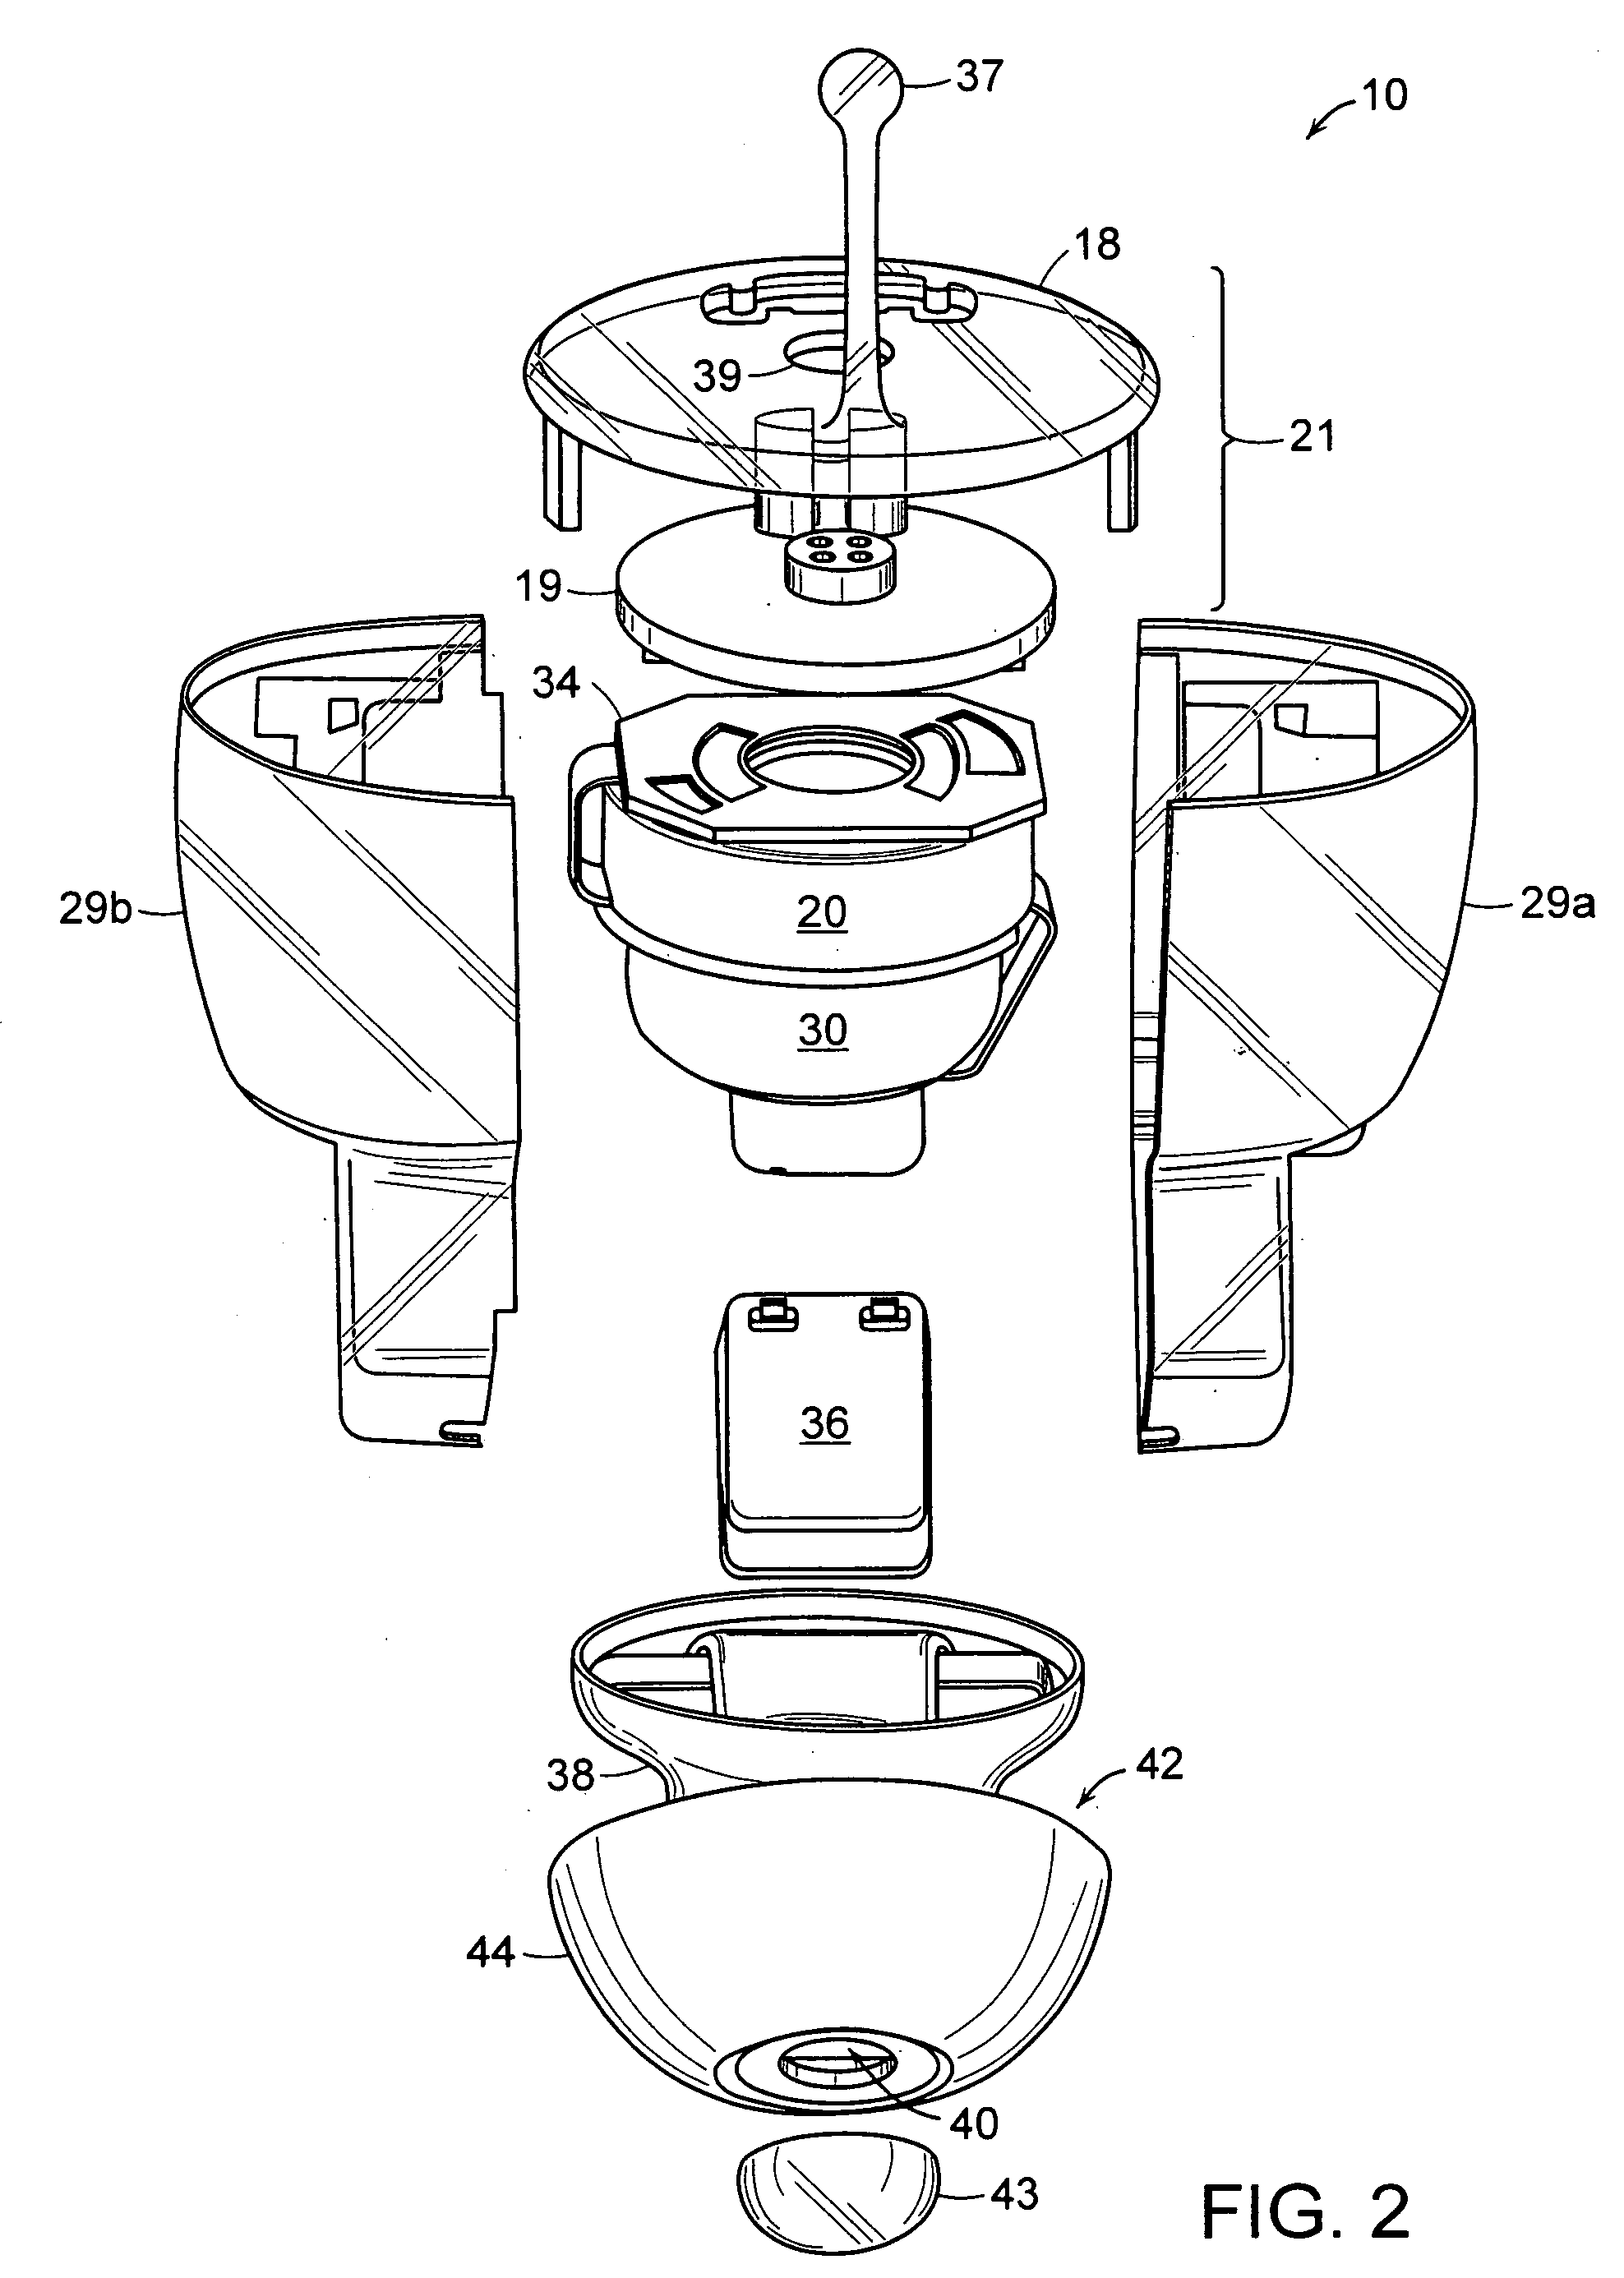 Hearing aid circuit with integrated switch and battery